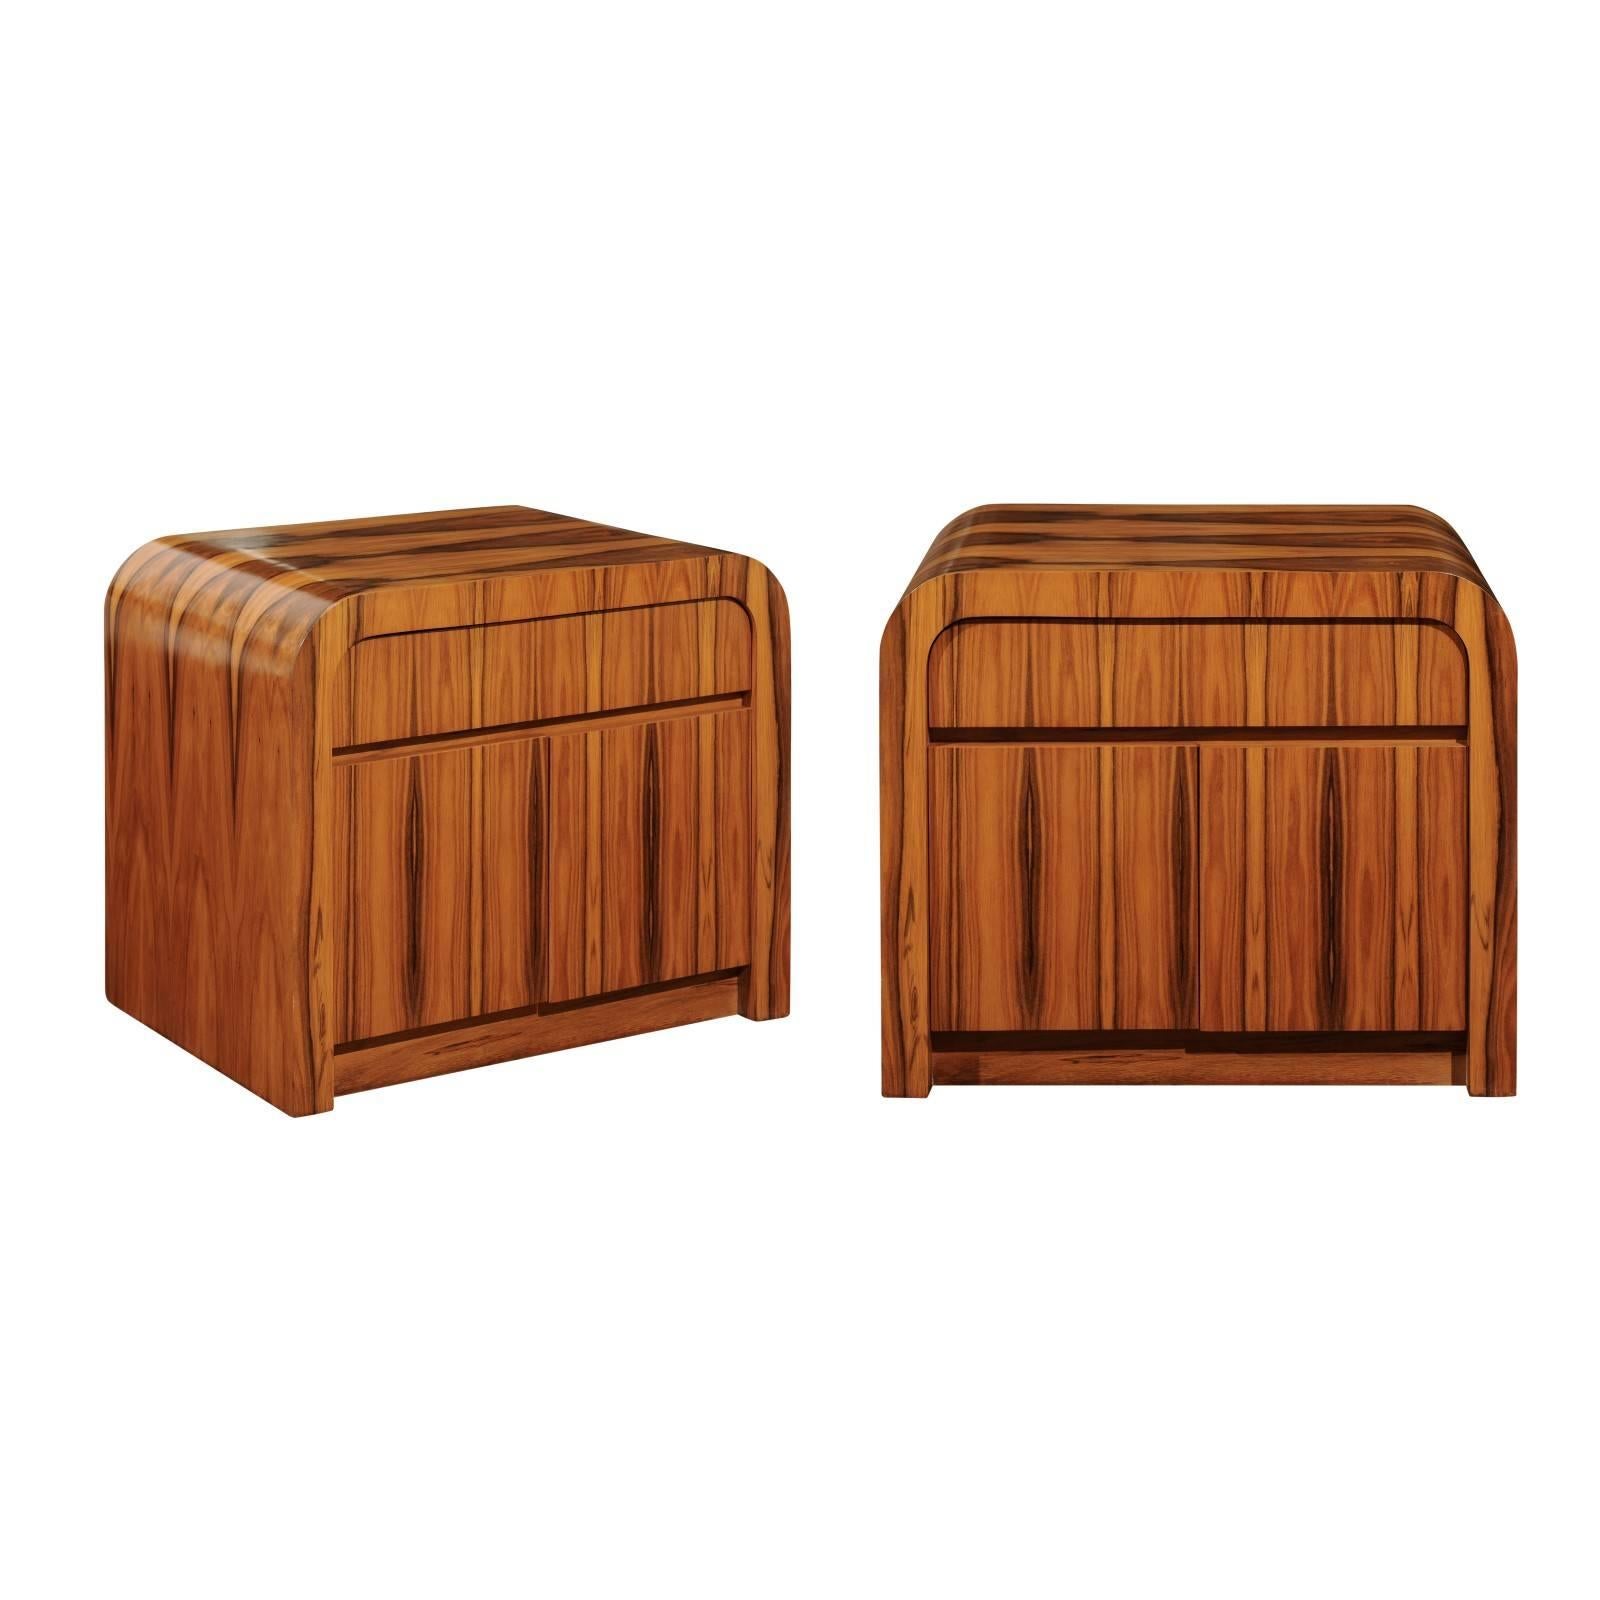 Magnificent Restored Waterfall End Tables in Bookmatched Teak, circa 1975